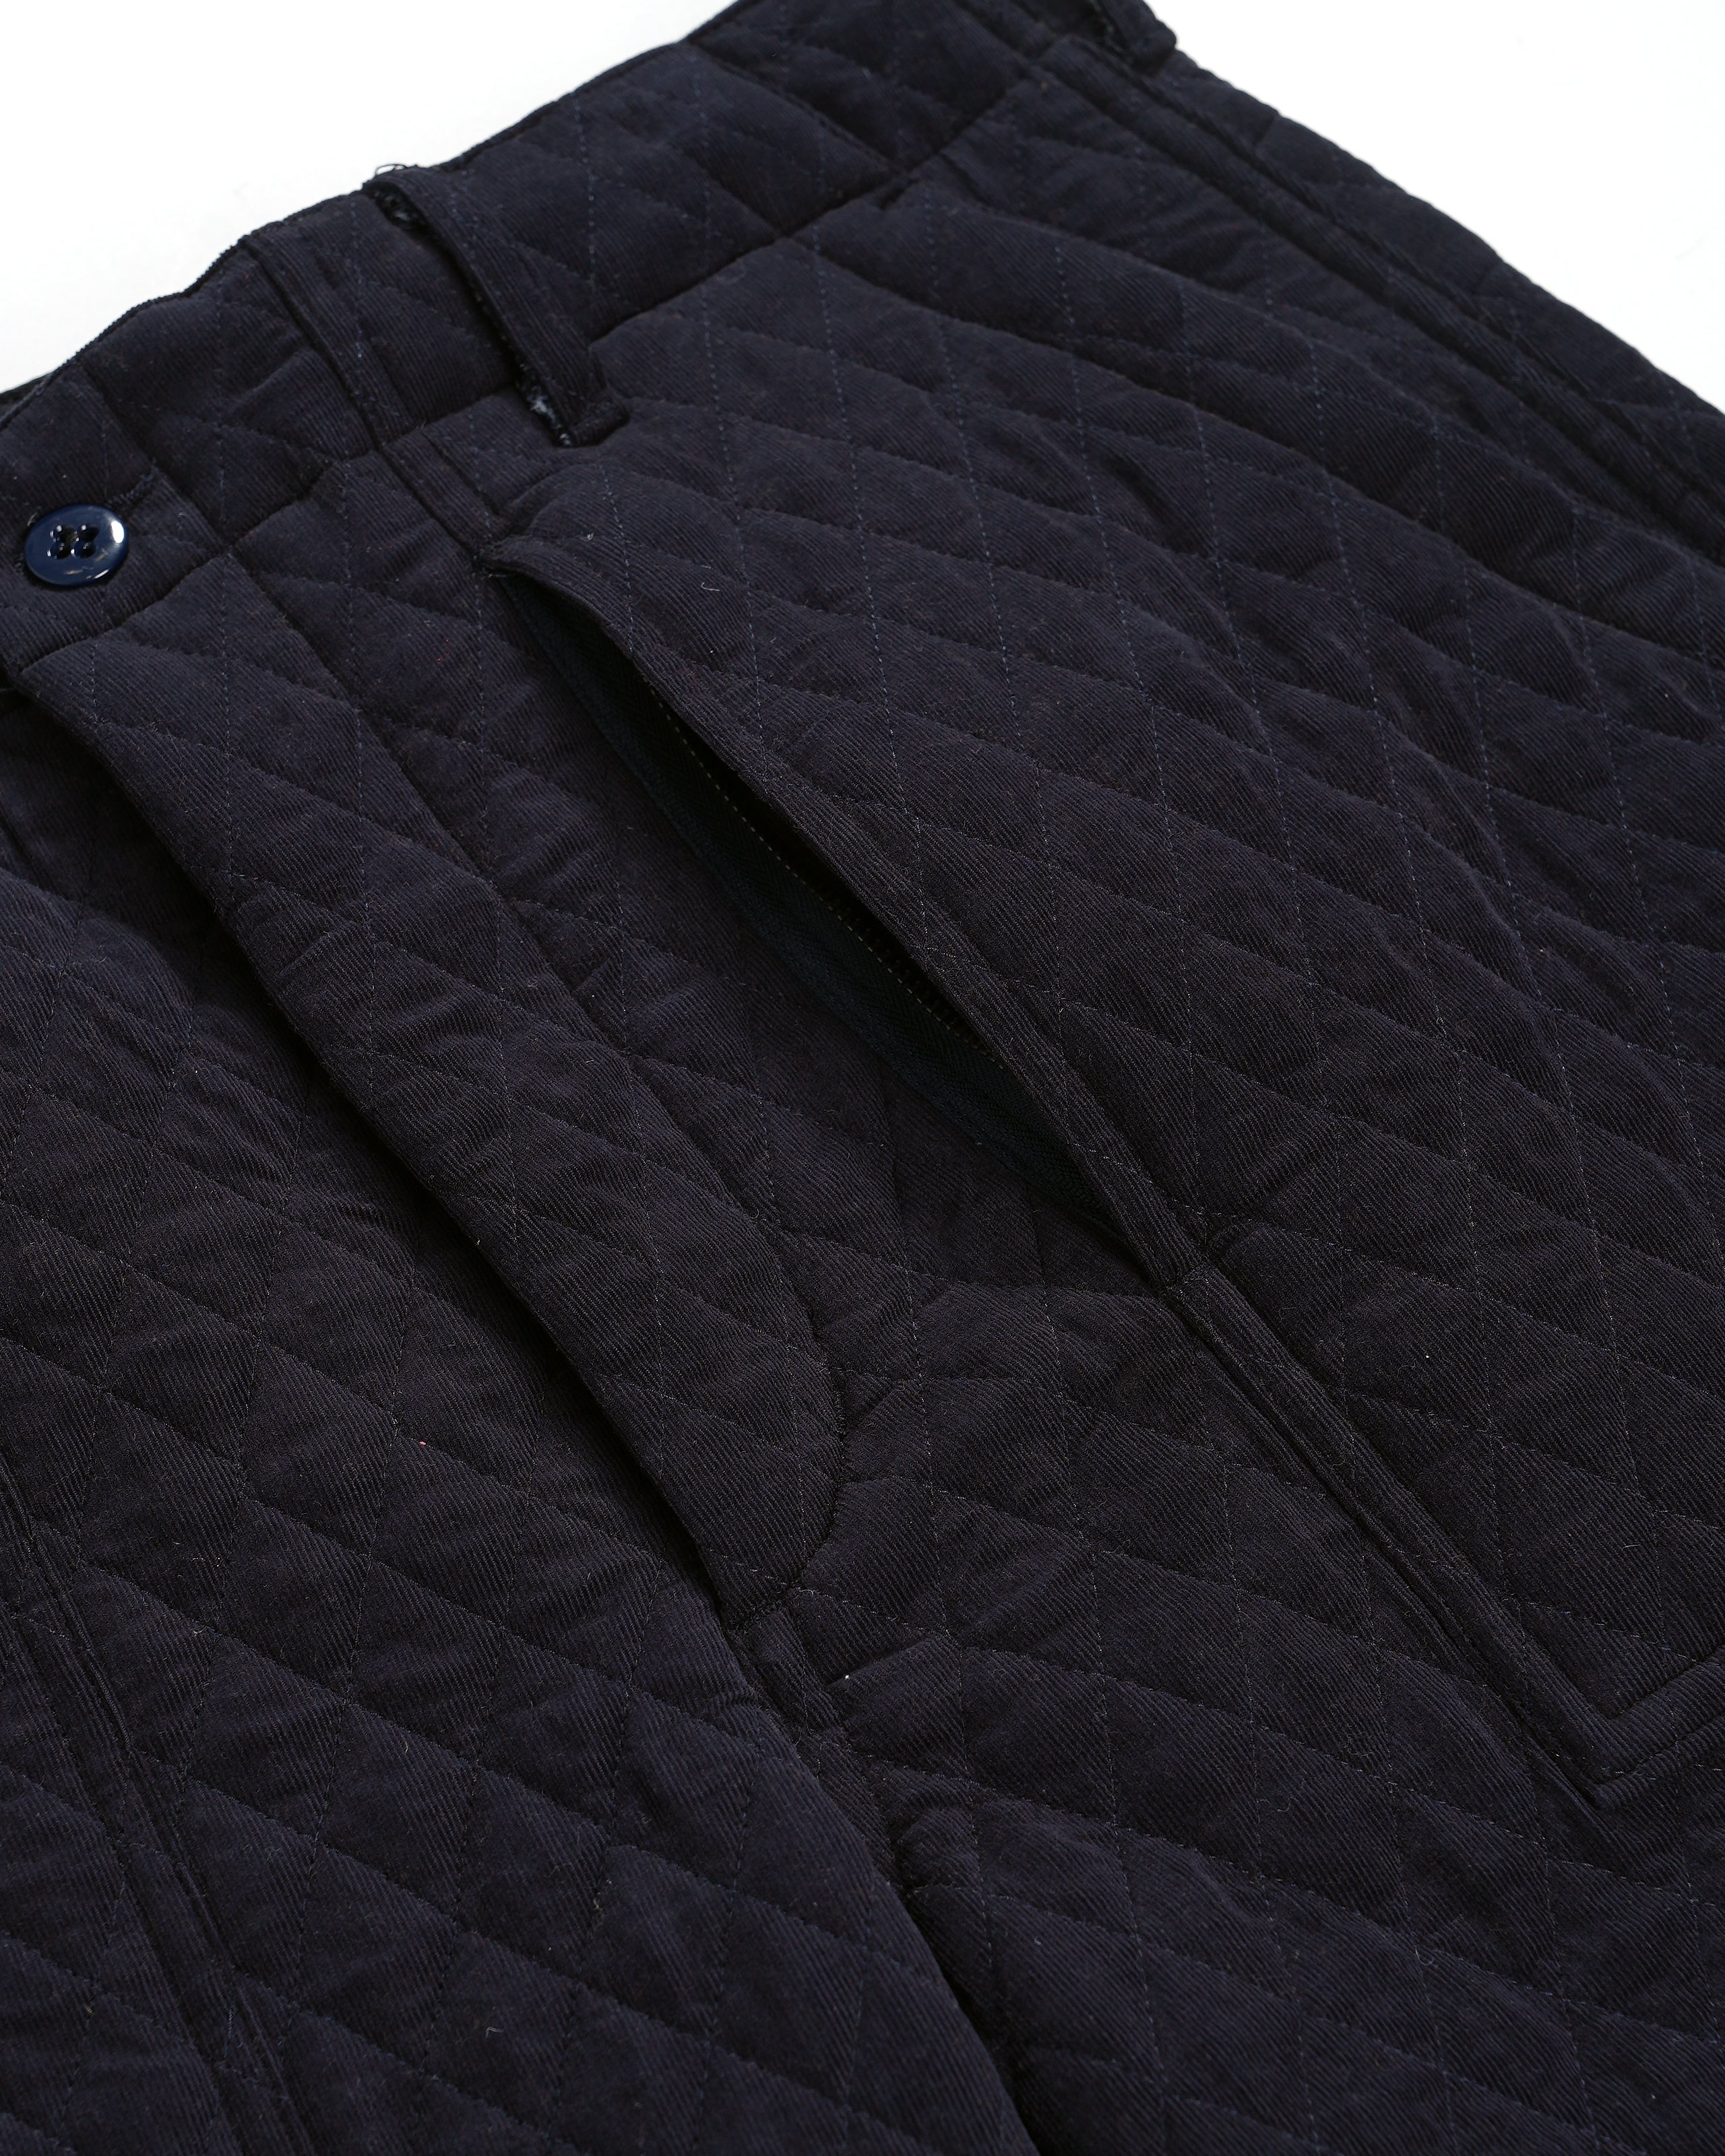 Fatigue Pant - Dk. Navy CP Quilted Corduroy